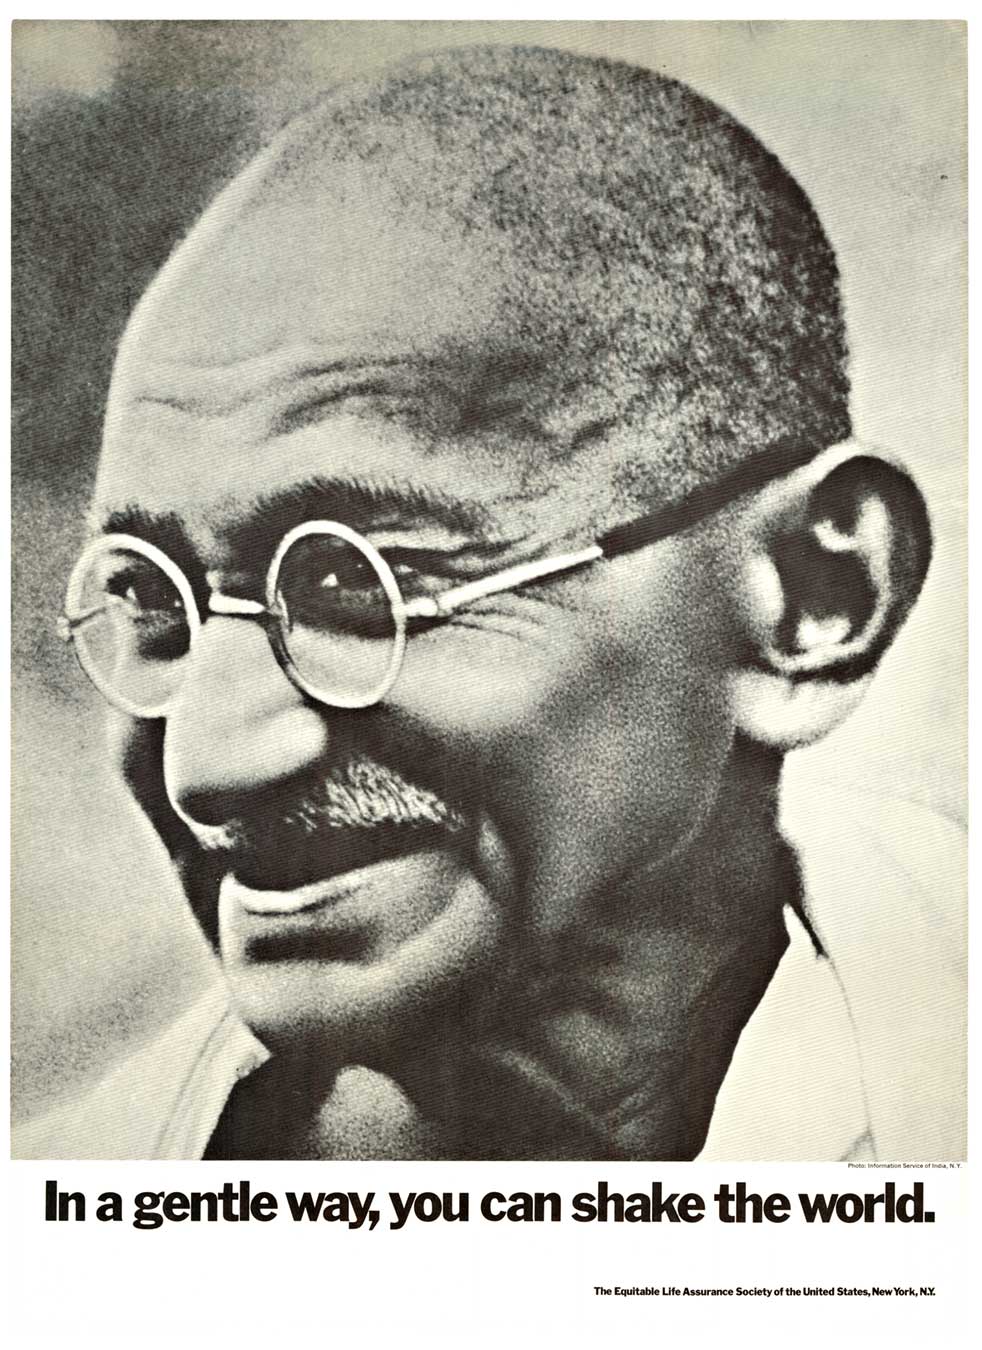 Original Mahatma Gandhi vintage poster. Photo: Information Services of India, N.Y. In a gentle way, you can shake the world. <br>The Equitable Life Assurance Society of the United States, New York, NY. <br>Archival linen backed, ready to frame, Grad A